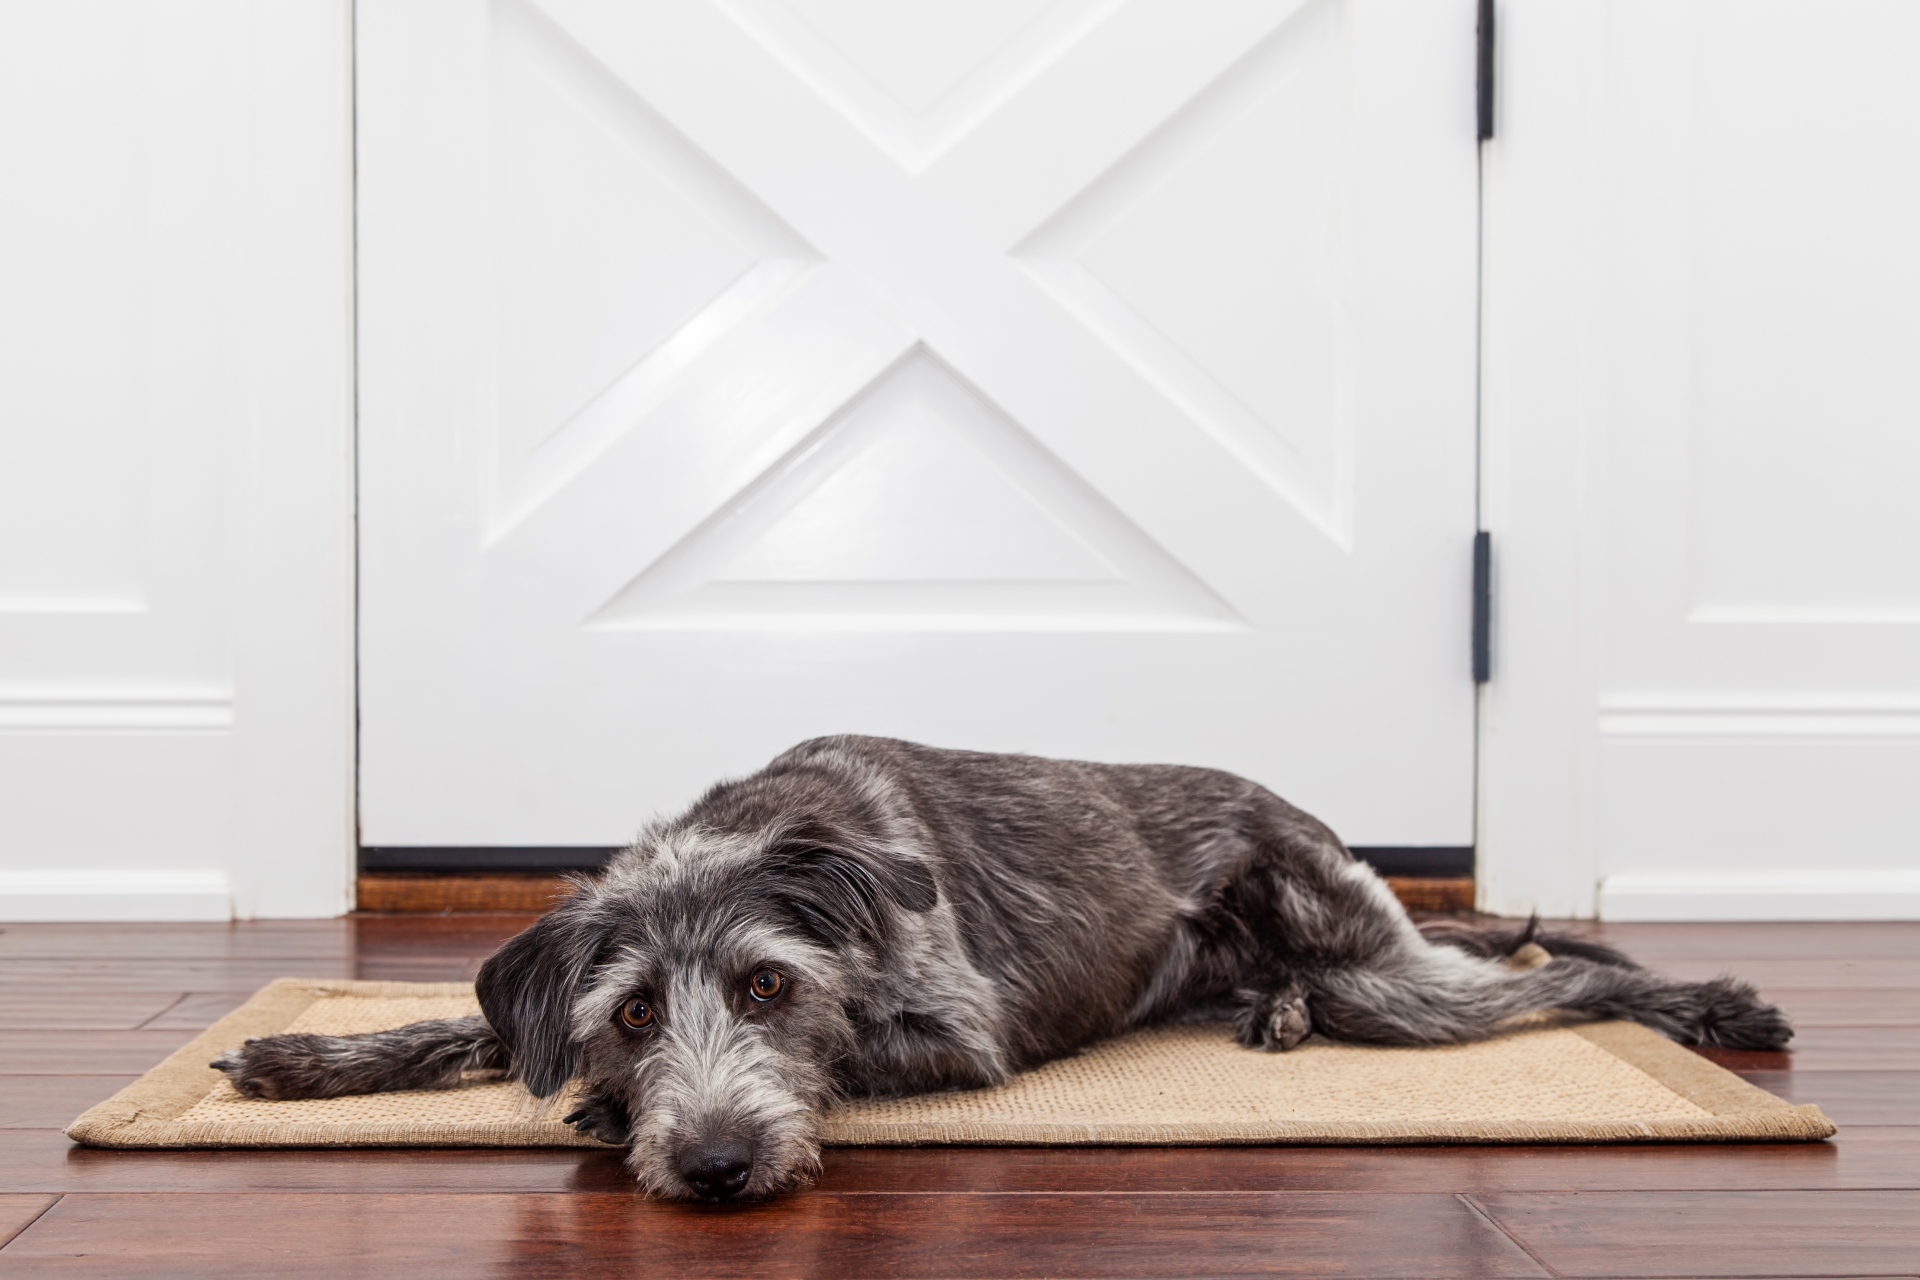 A grieving pet - how to help your pet overcome losing a loved one